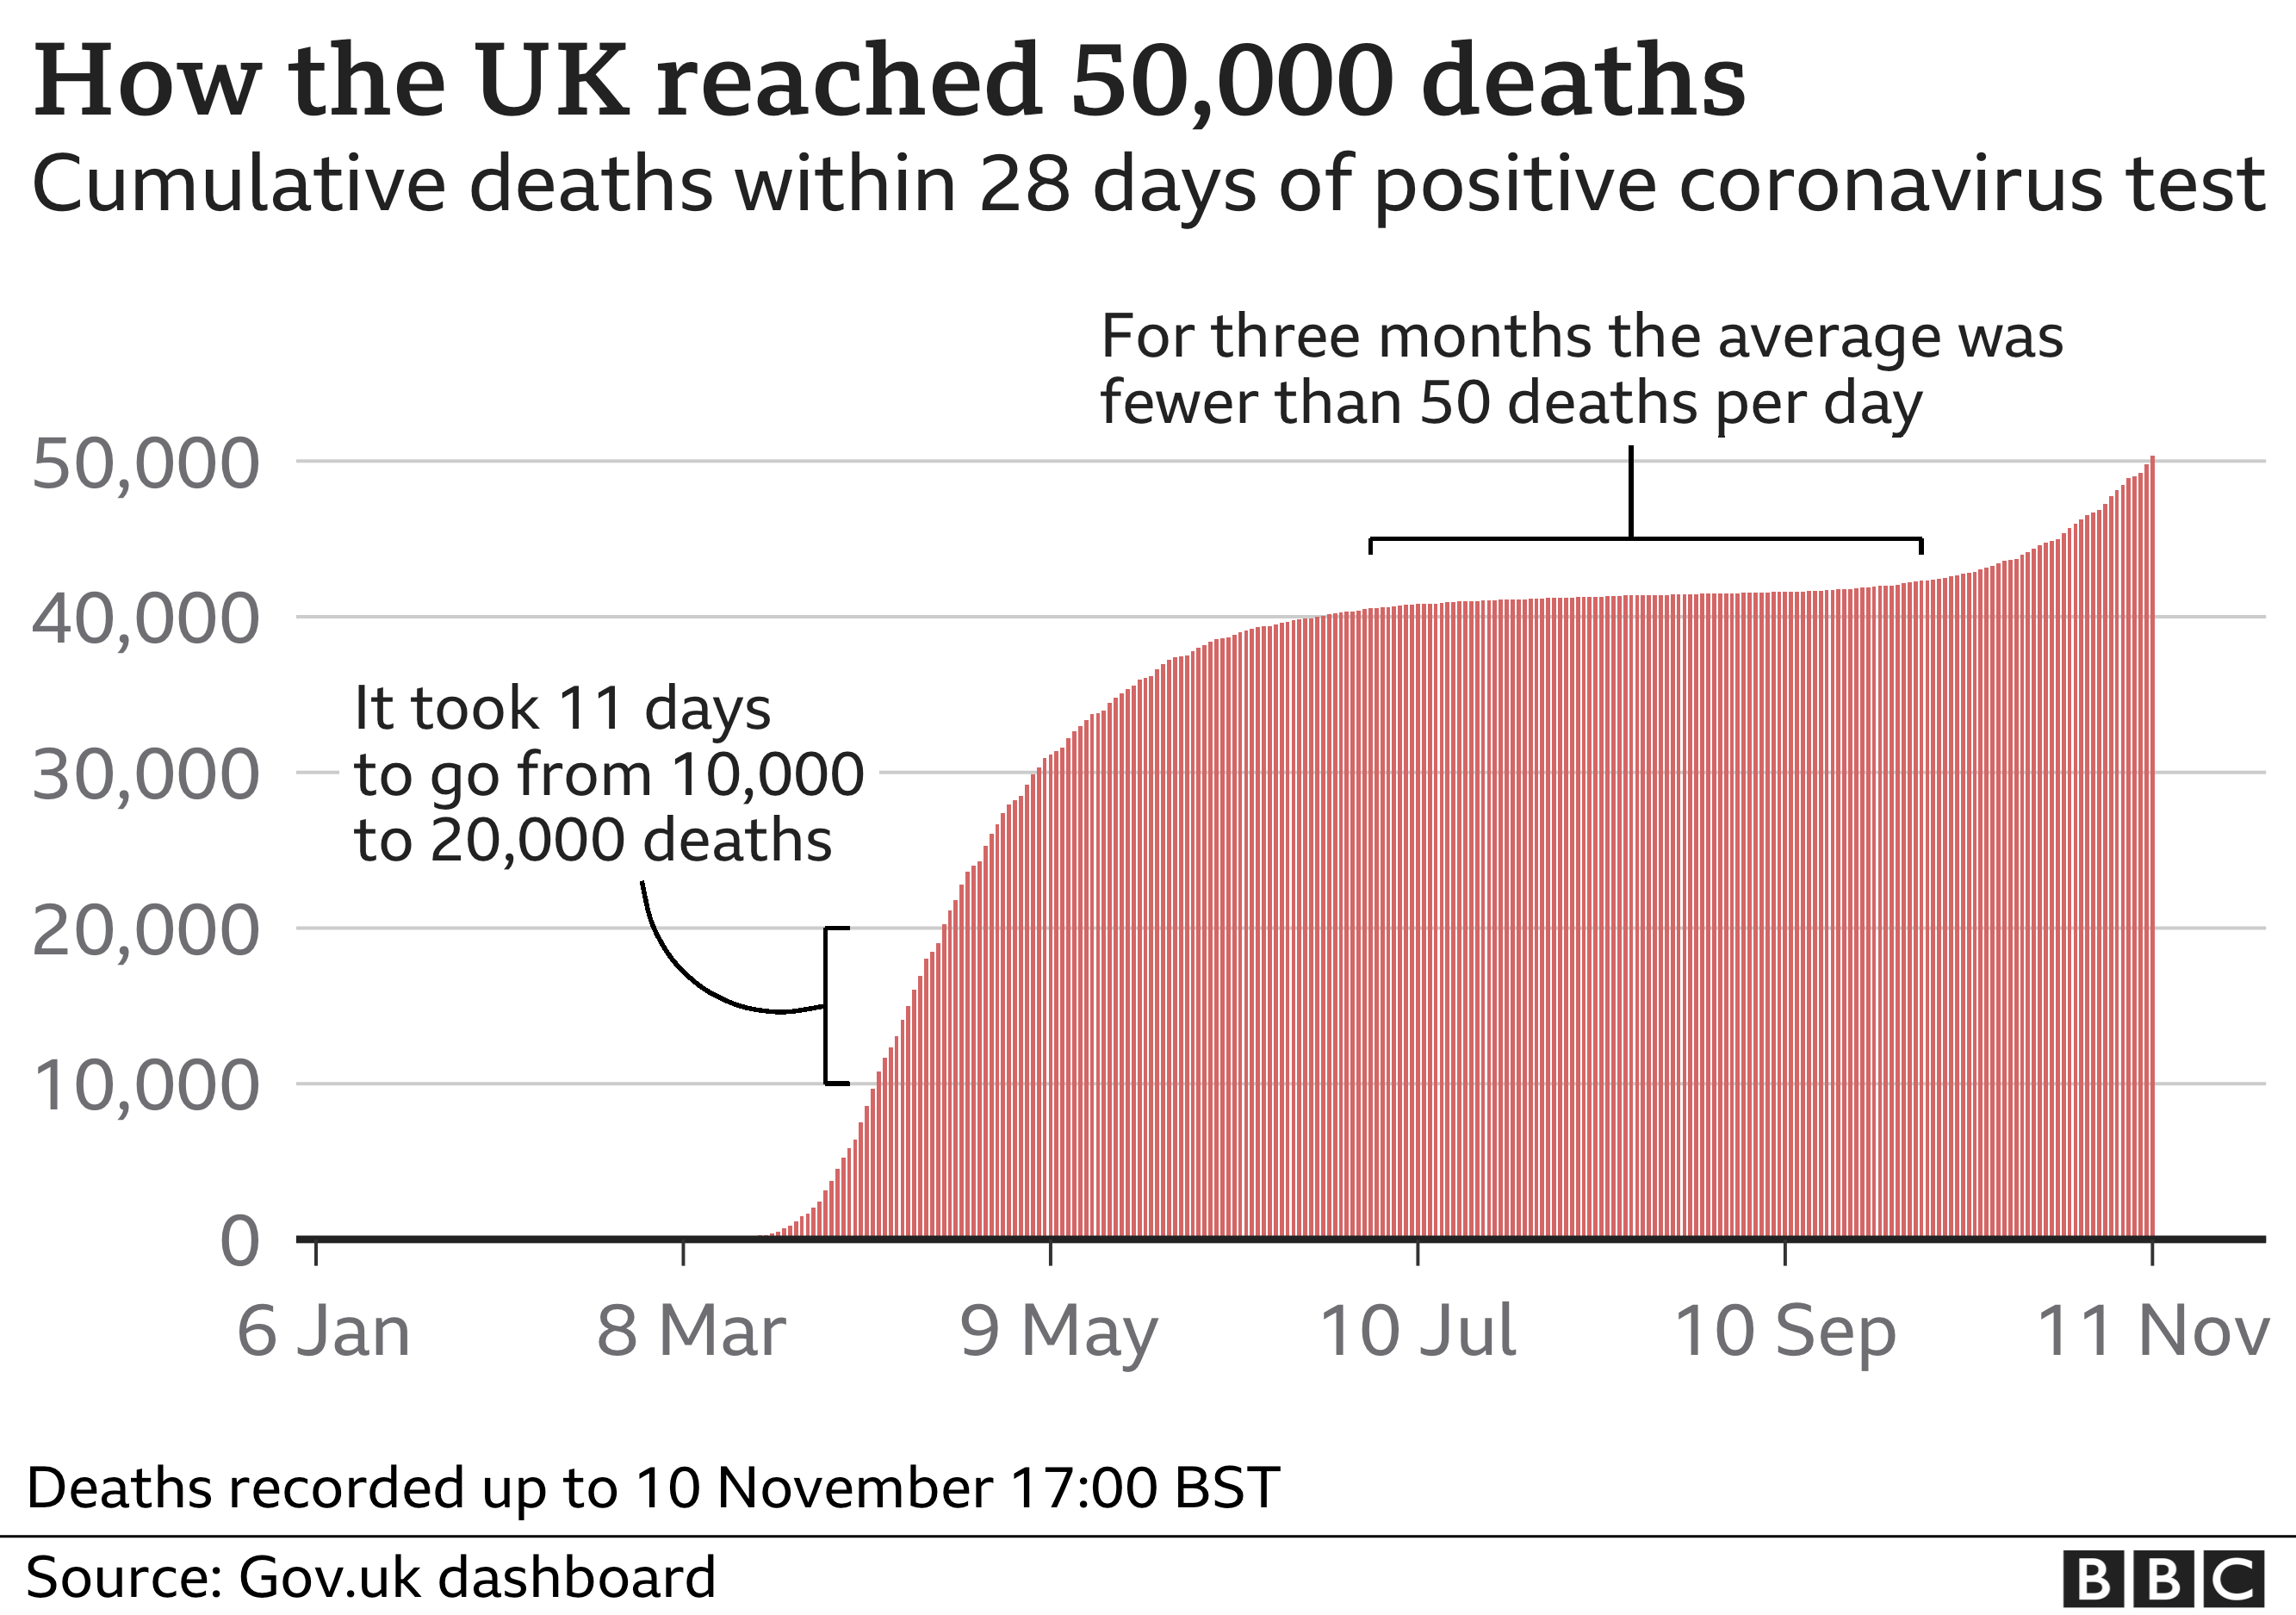 Graph showing cumulative daily deaths from coronavirus in the UK